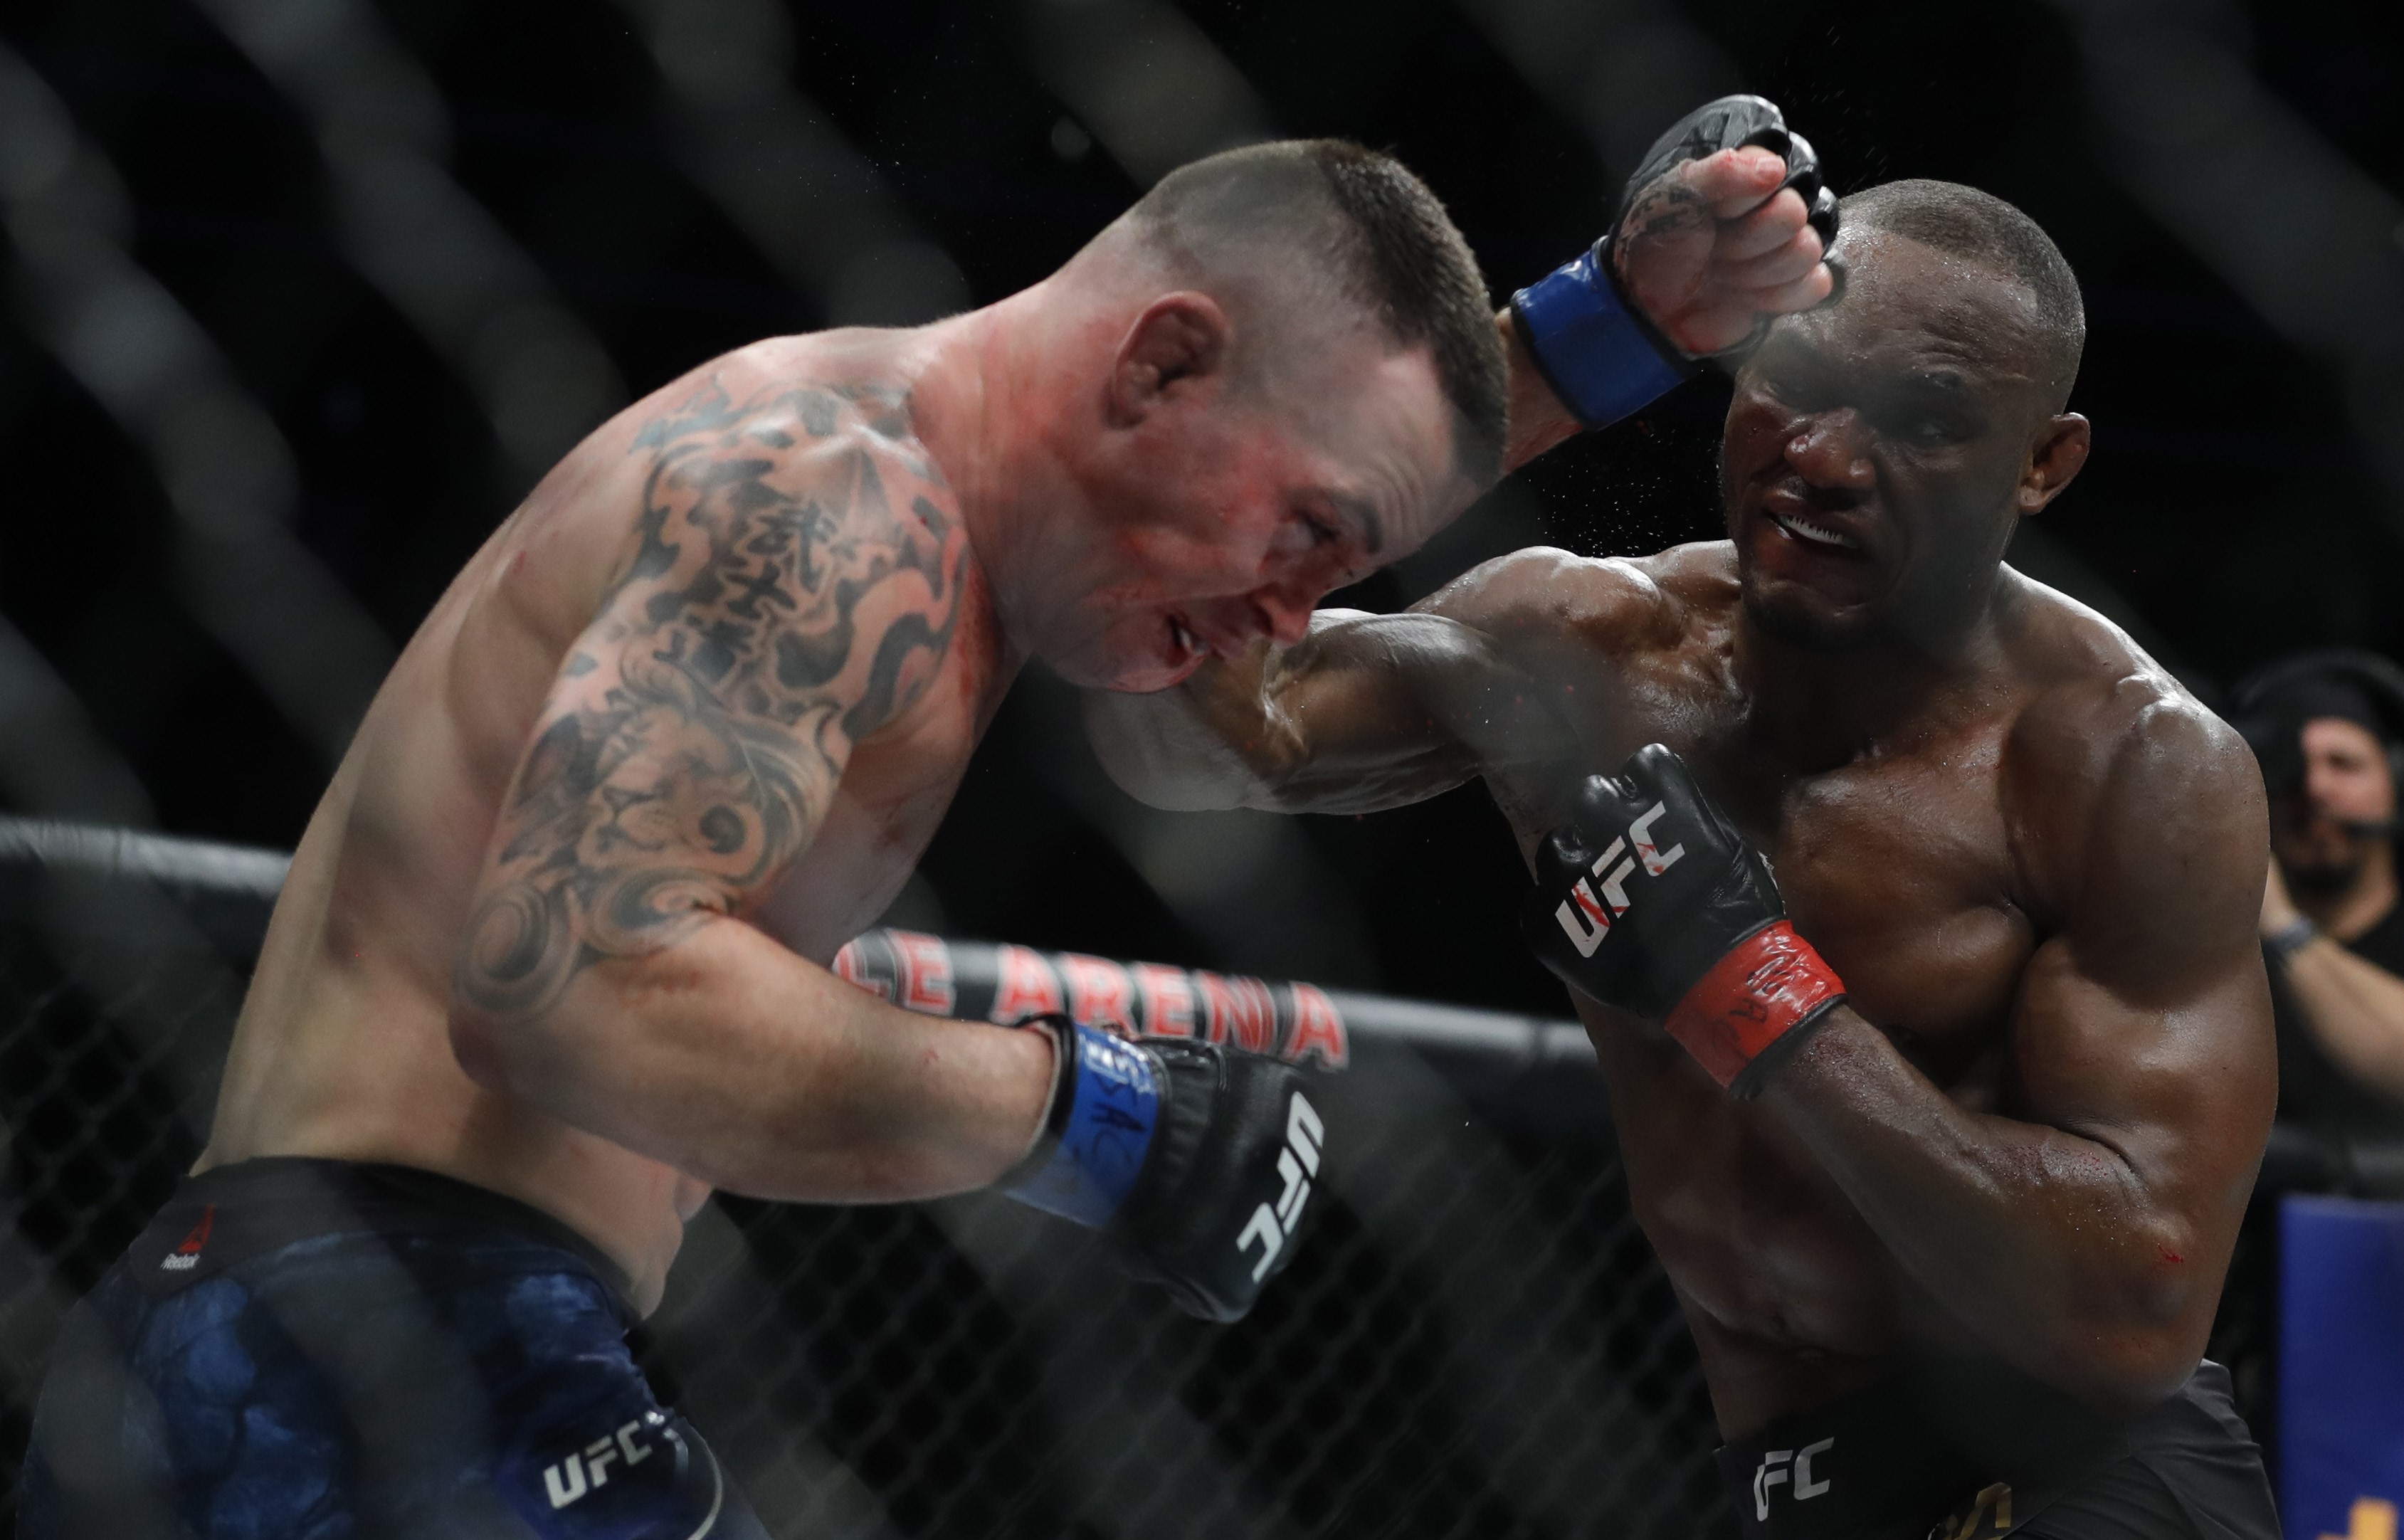 Colby Covington (left) gets hit by UFC welterweight champion Kamaru Usman in the fifth round of their title fight at UFC 245 in 2019. Photo: AFP